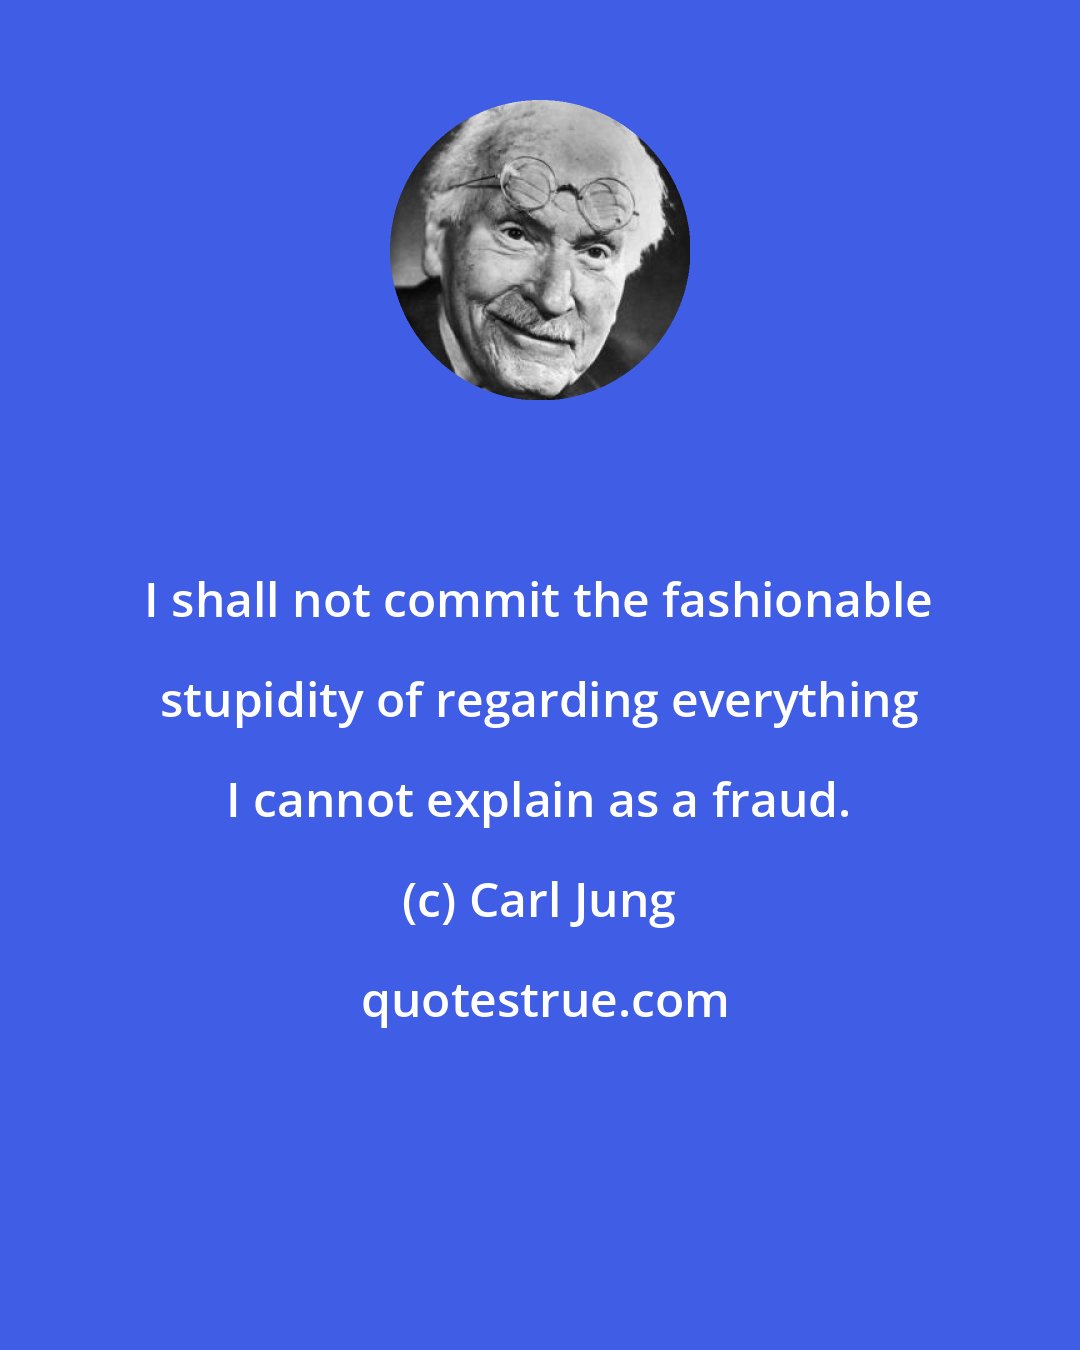 Carl Jung: I shall not commit the fashionable stupidity of regarding everything I cannot explain as a fraud.